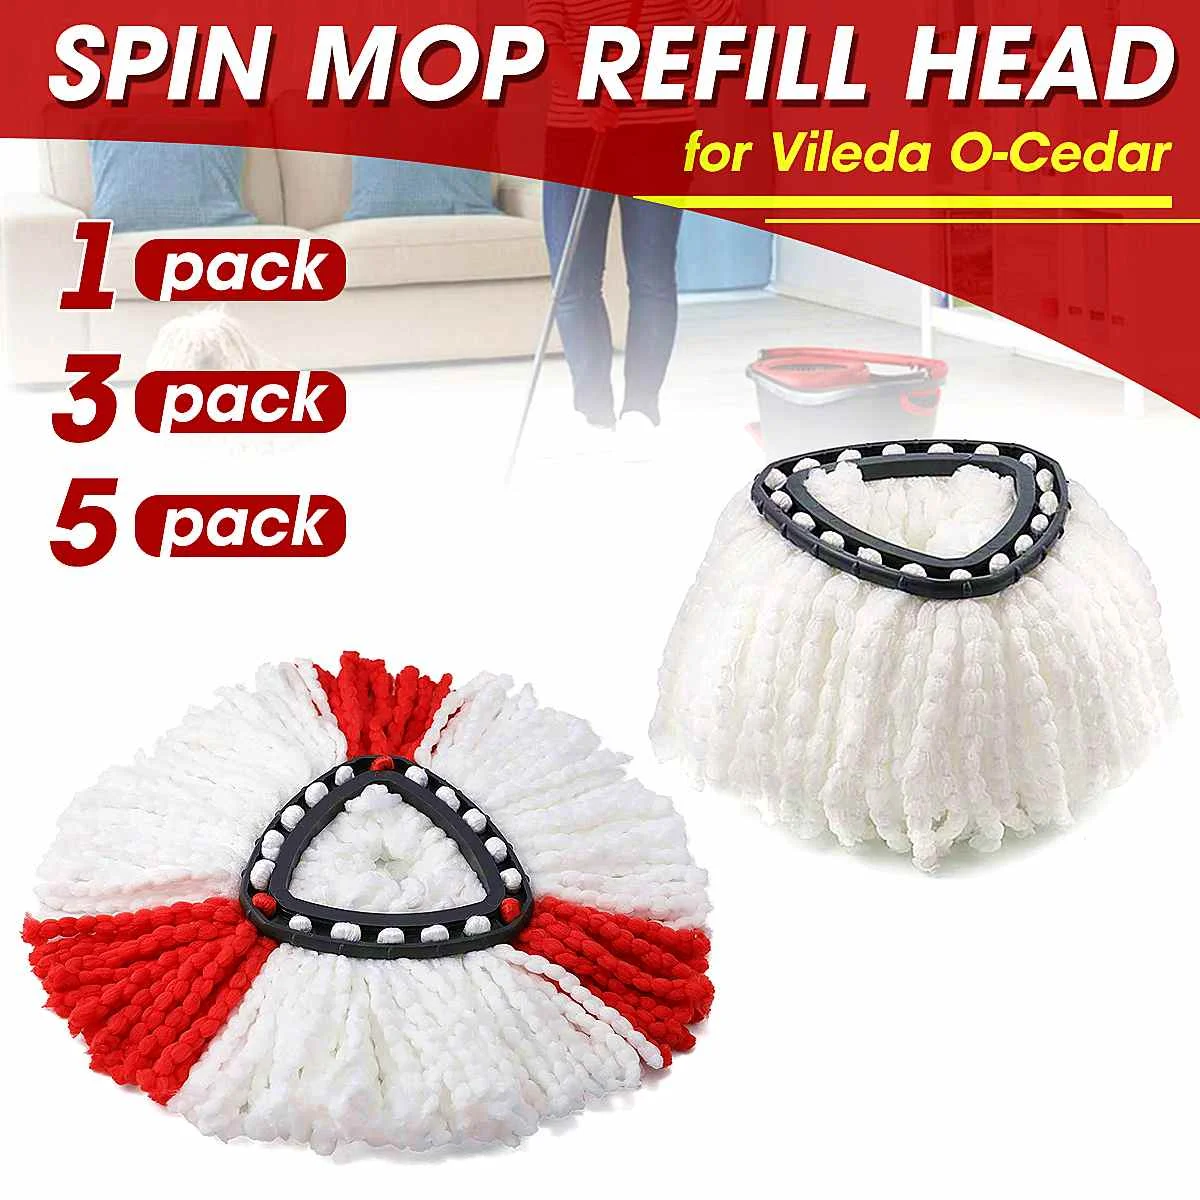 1/3/5pcs Microfiber Spin Mop Clean Refill Replacement Head for Vileda O-Cedar EasyWring Mop Home Cleaning Tools Mop Accessories